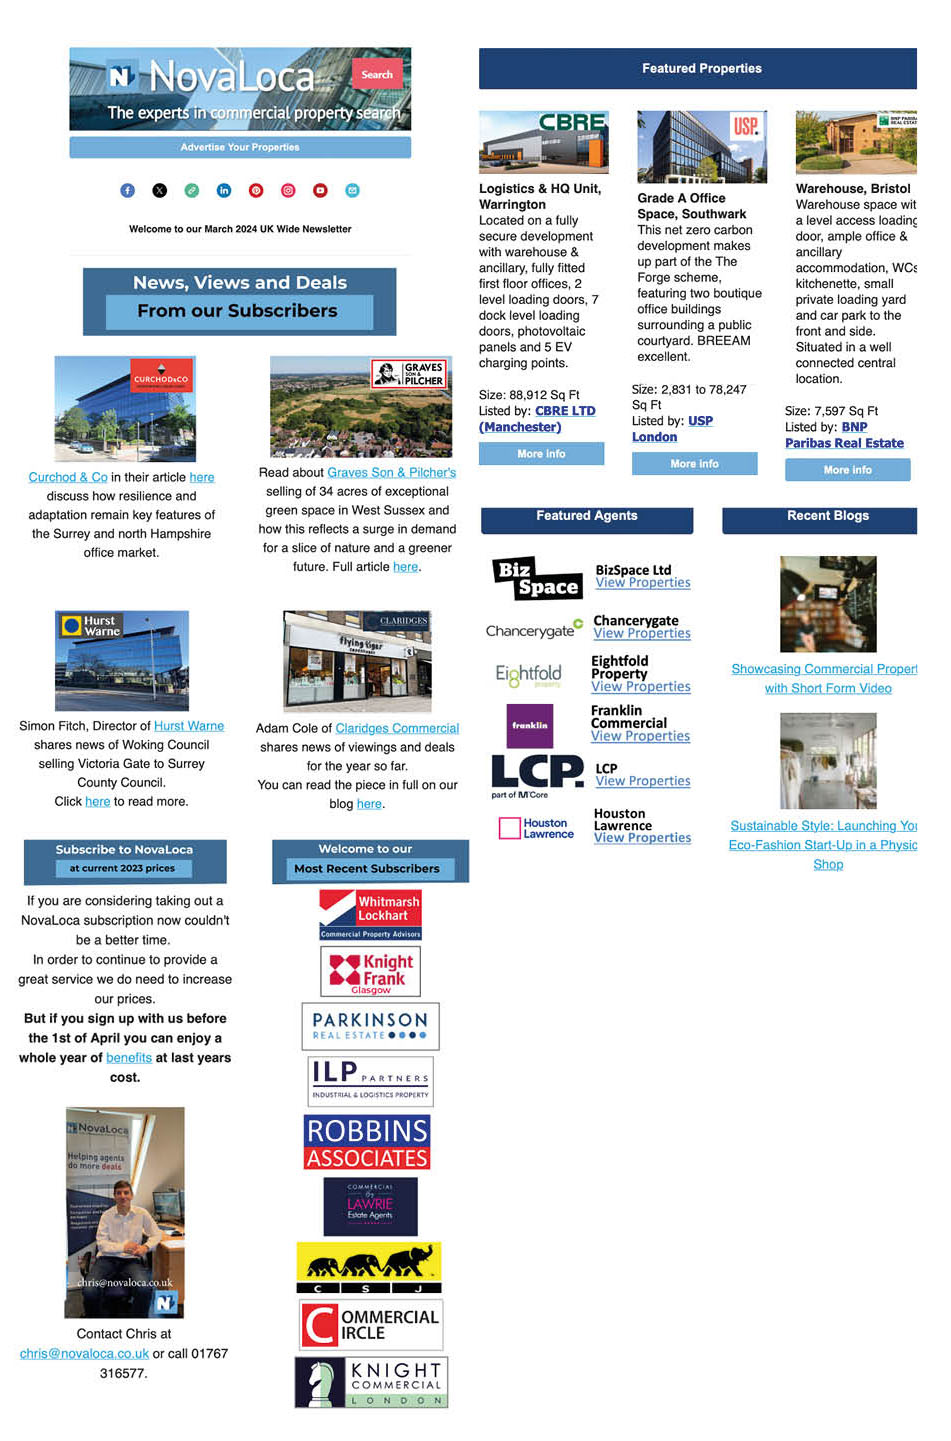 nnewsletter articles on a one page layout 